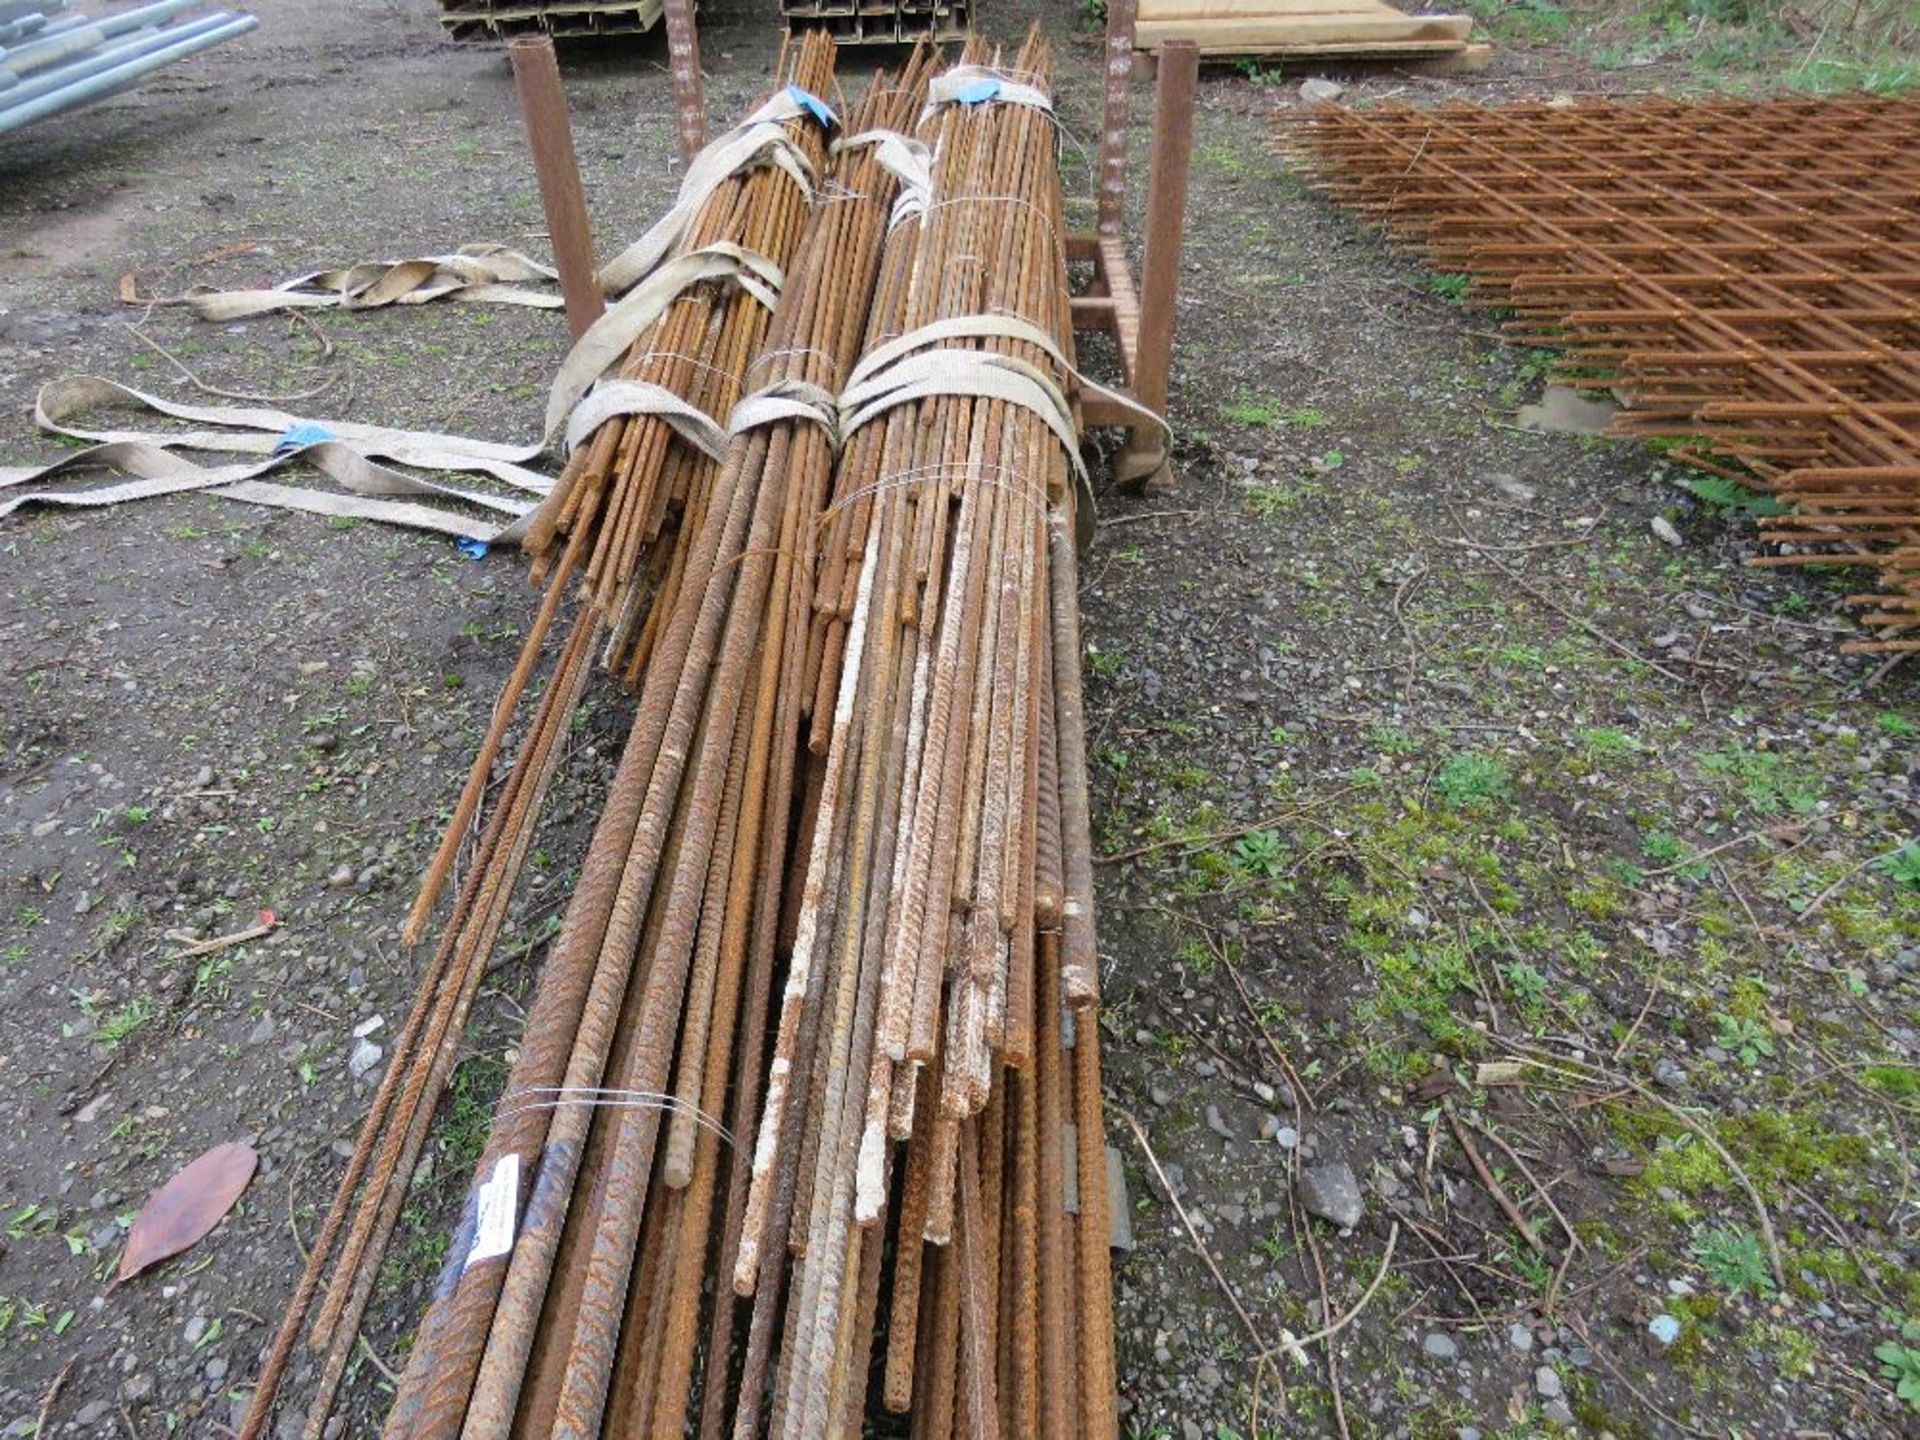 STILLAGE OF ASSORTED REBAR CONCRETE REINFORCING BAR 6FT -22FT APPROX SOURCED FROM COMPANY LIQUIDATI - Image 6 of 7